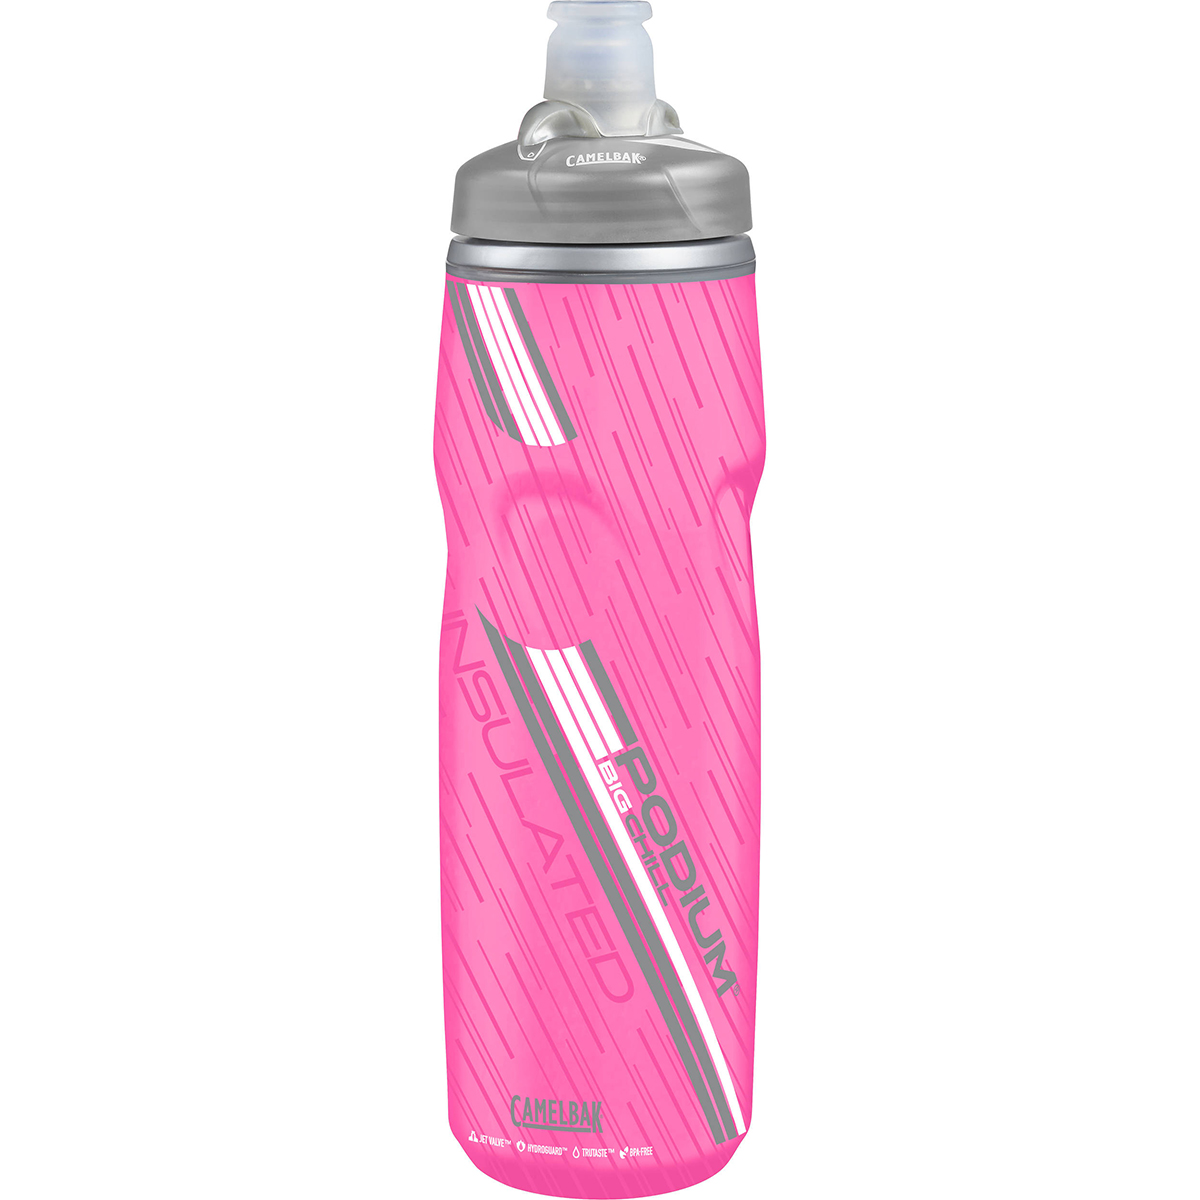 CamelBak Podium Big Chill 25 oz Insulated Water Bottle Pace Pink